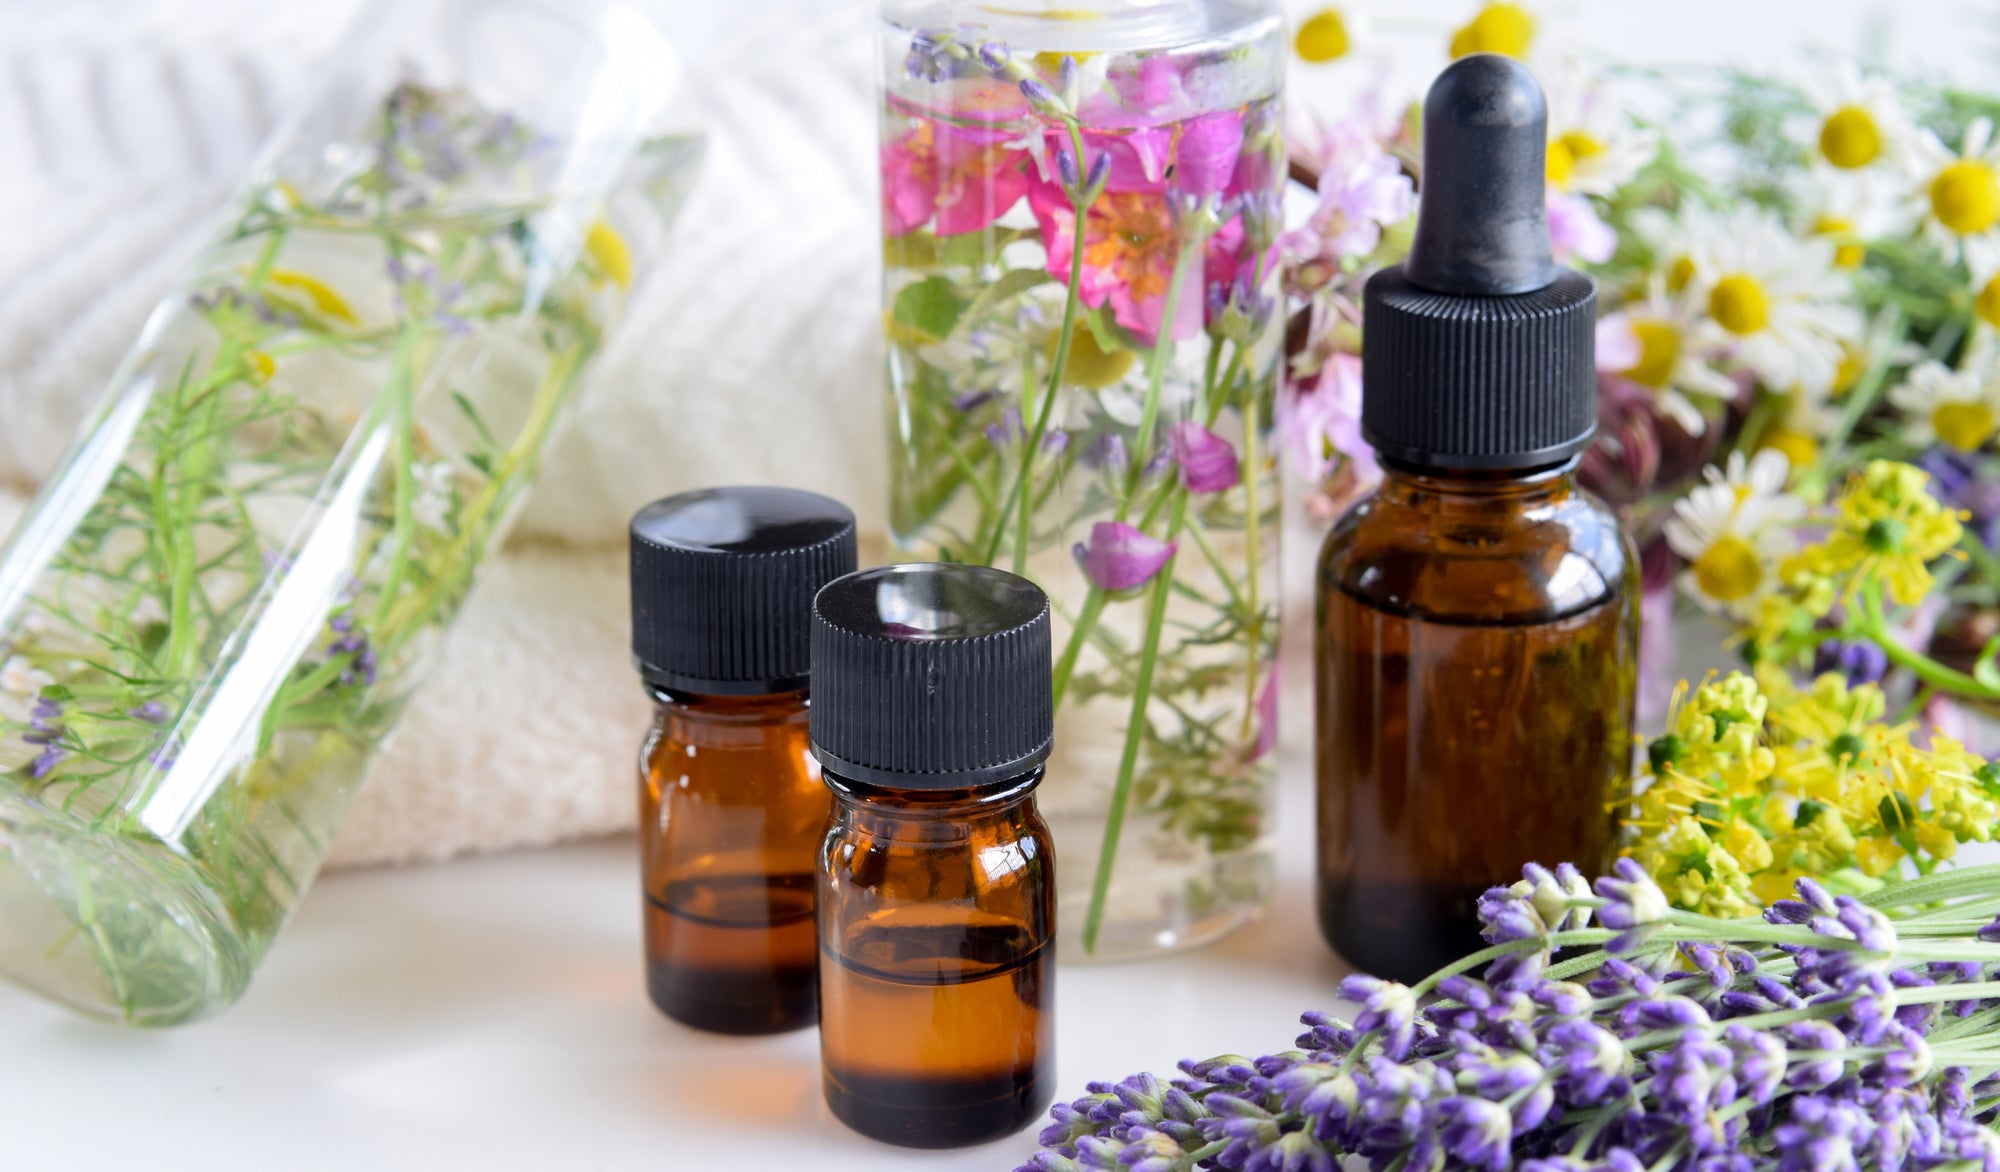 Intro to Wellness: Aromatherapy and Essential Oils